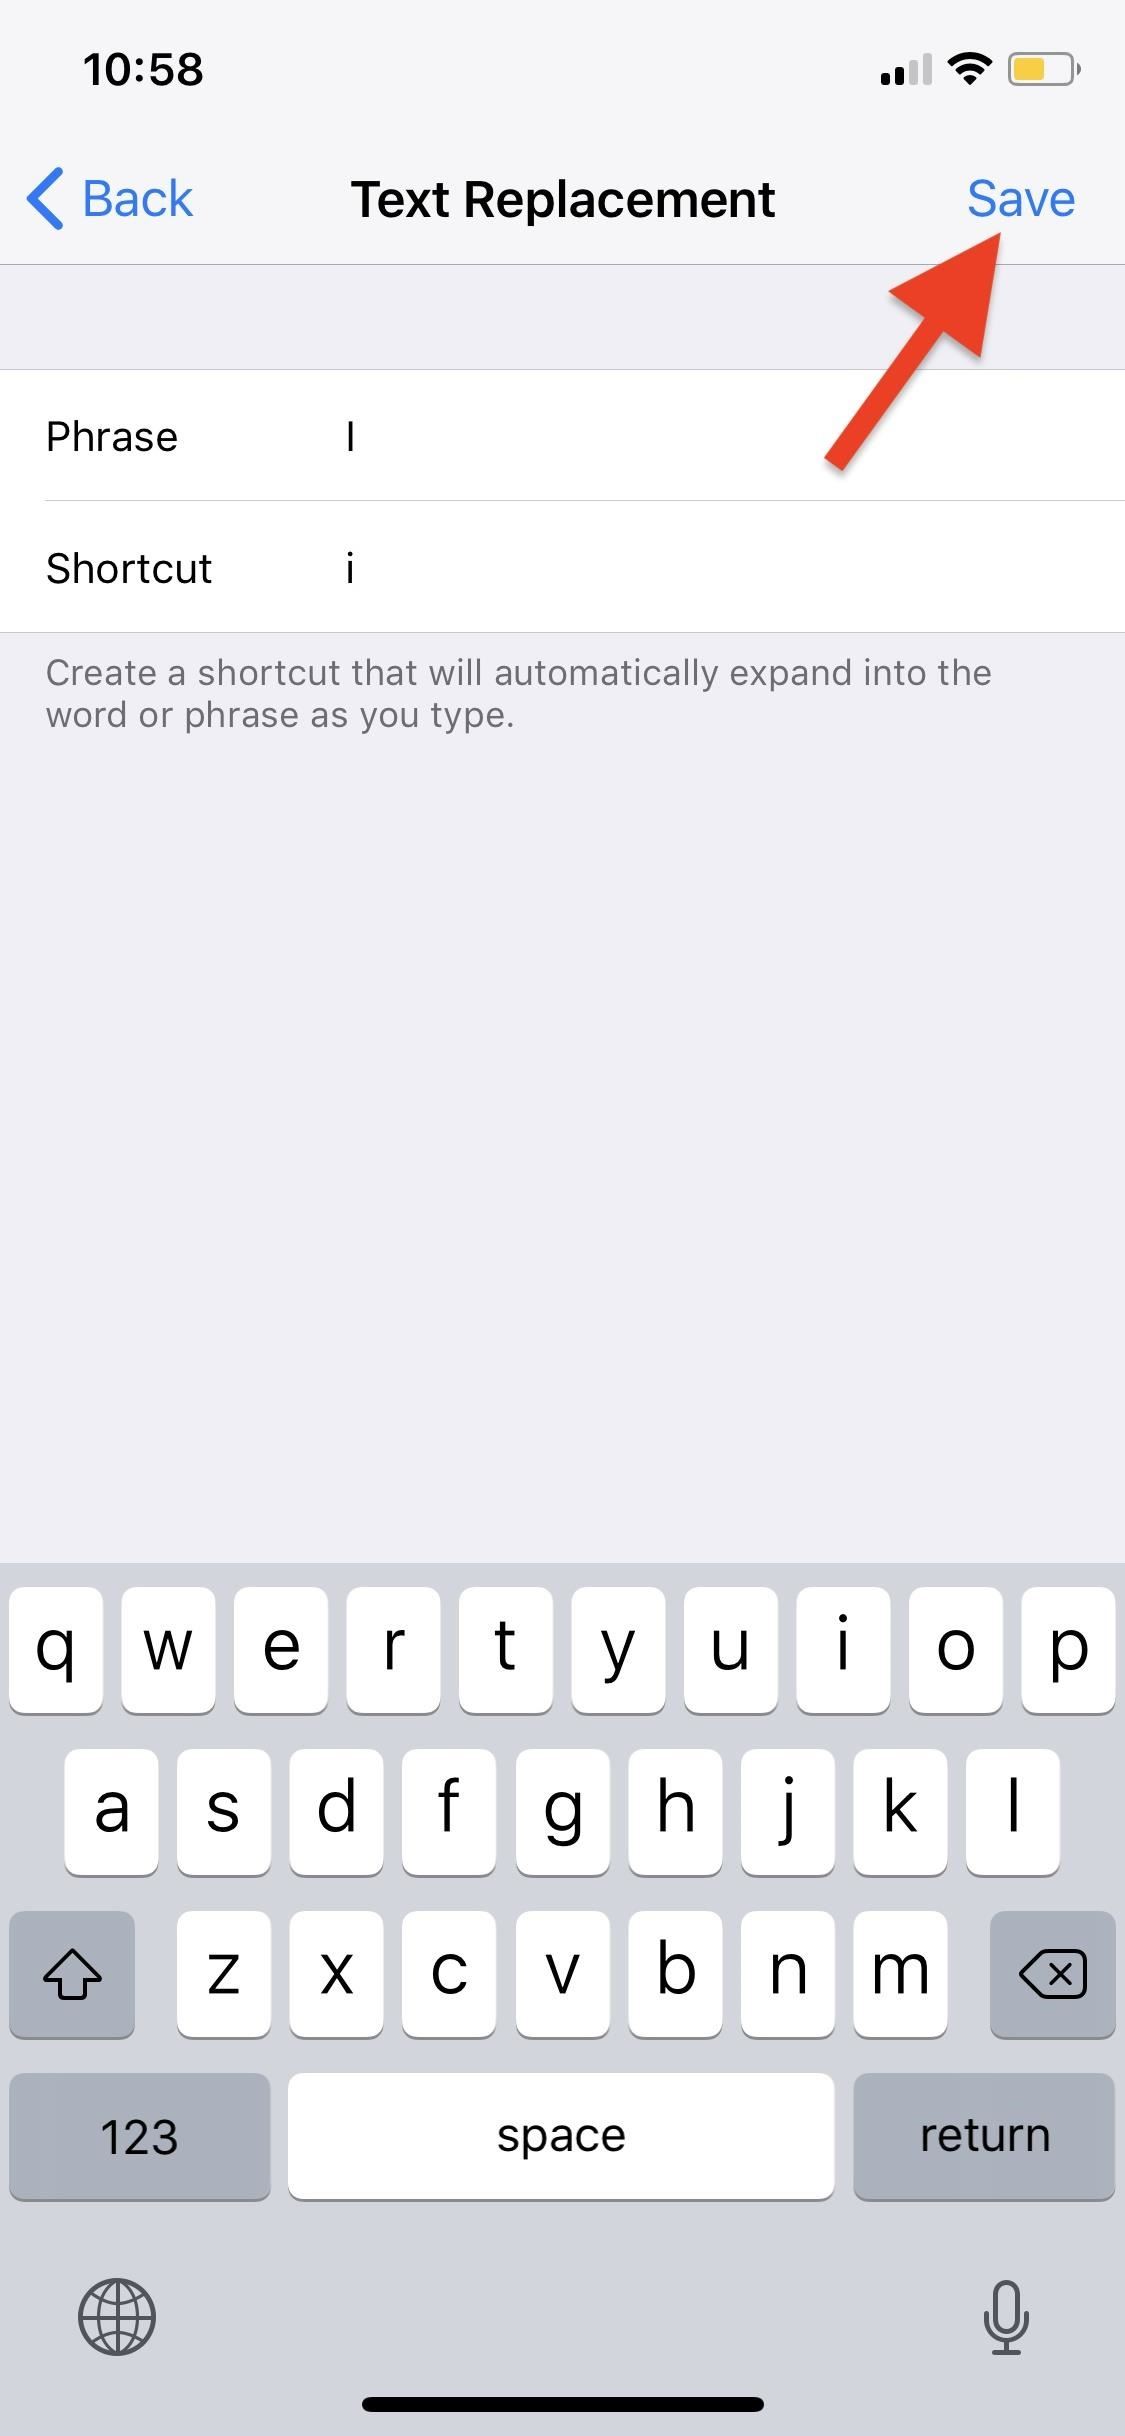 How to Fix the 'A [?]' Autocorrect Bug in iOS 11 When Typing 'i' Out on Your iPhone